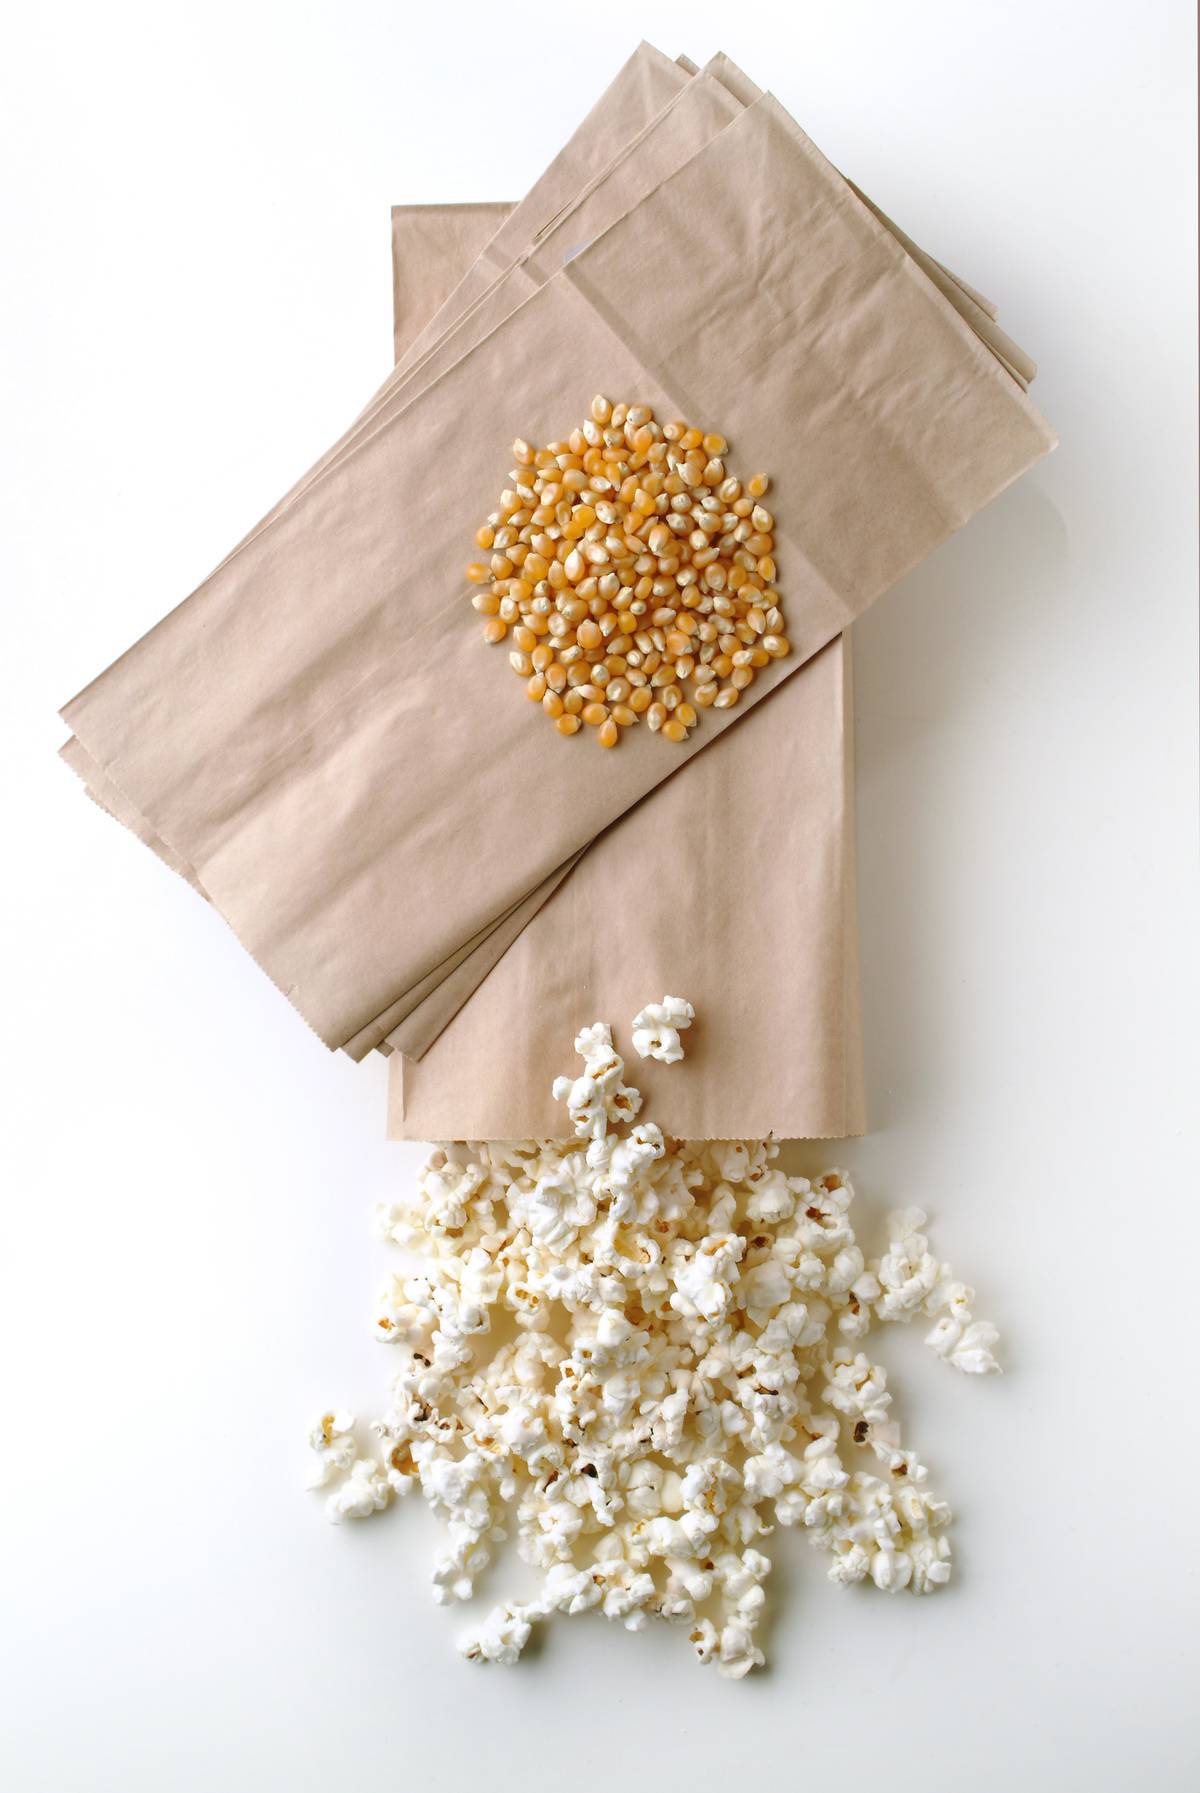 Popcorn pours out of a brown paper bag.